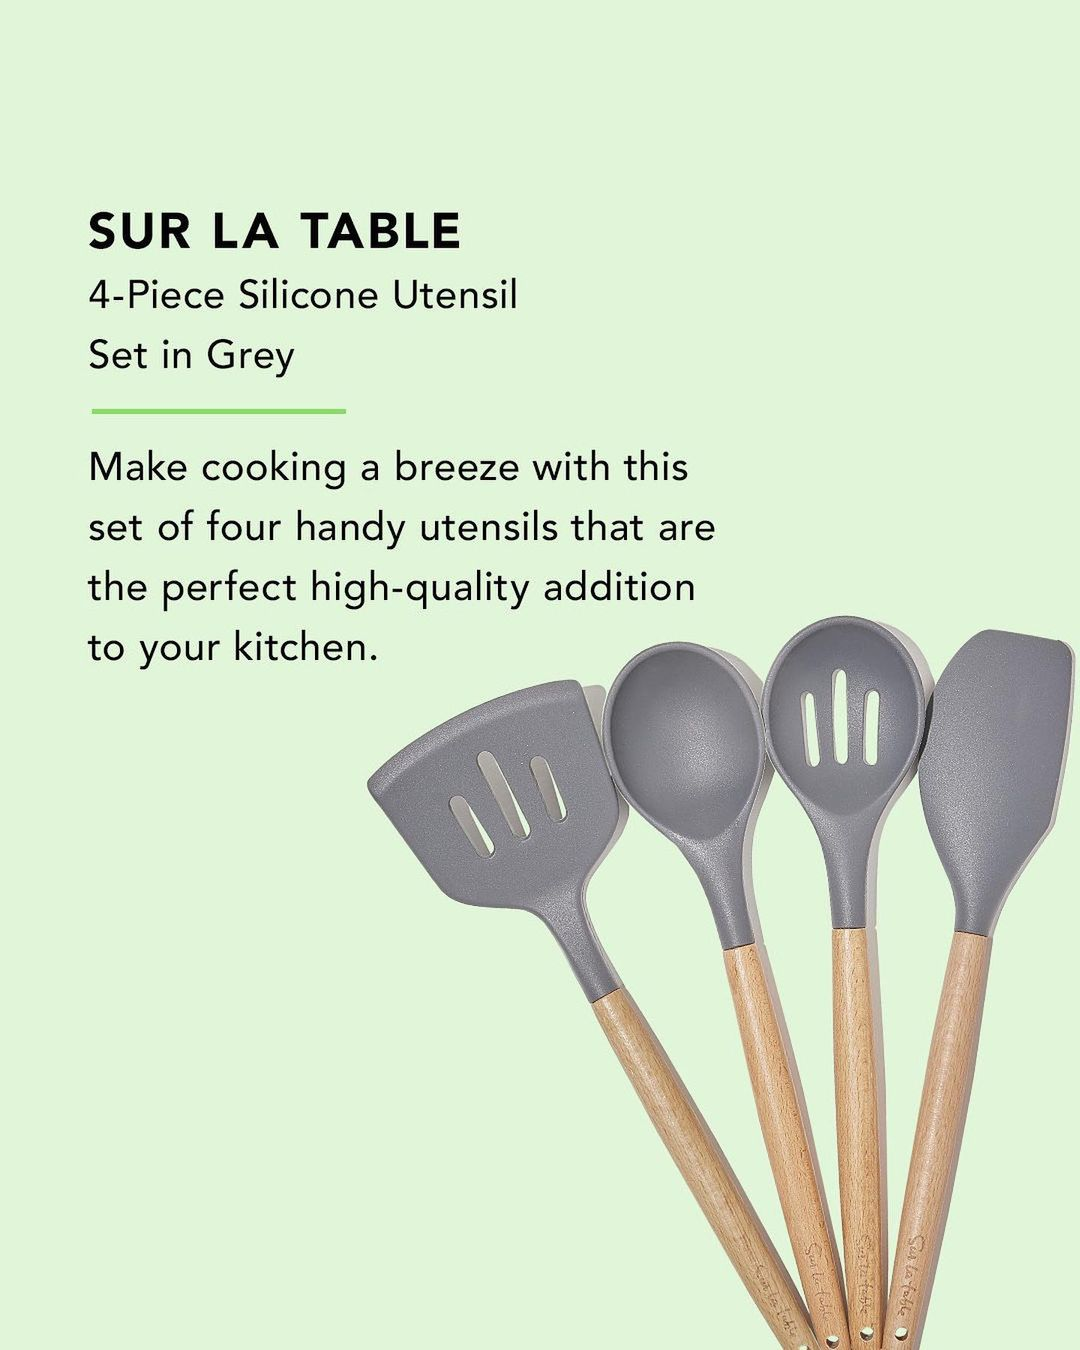 Sur La Table Utensil Set 4 Piece Silicone Wood Handles Gray New in